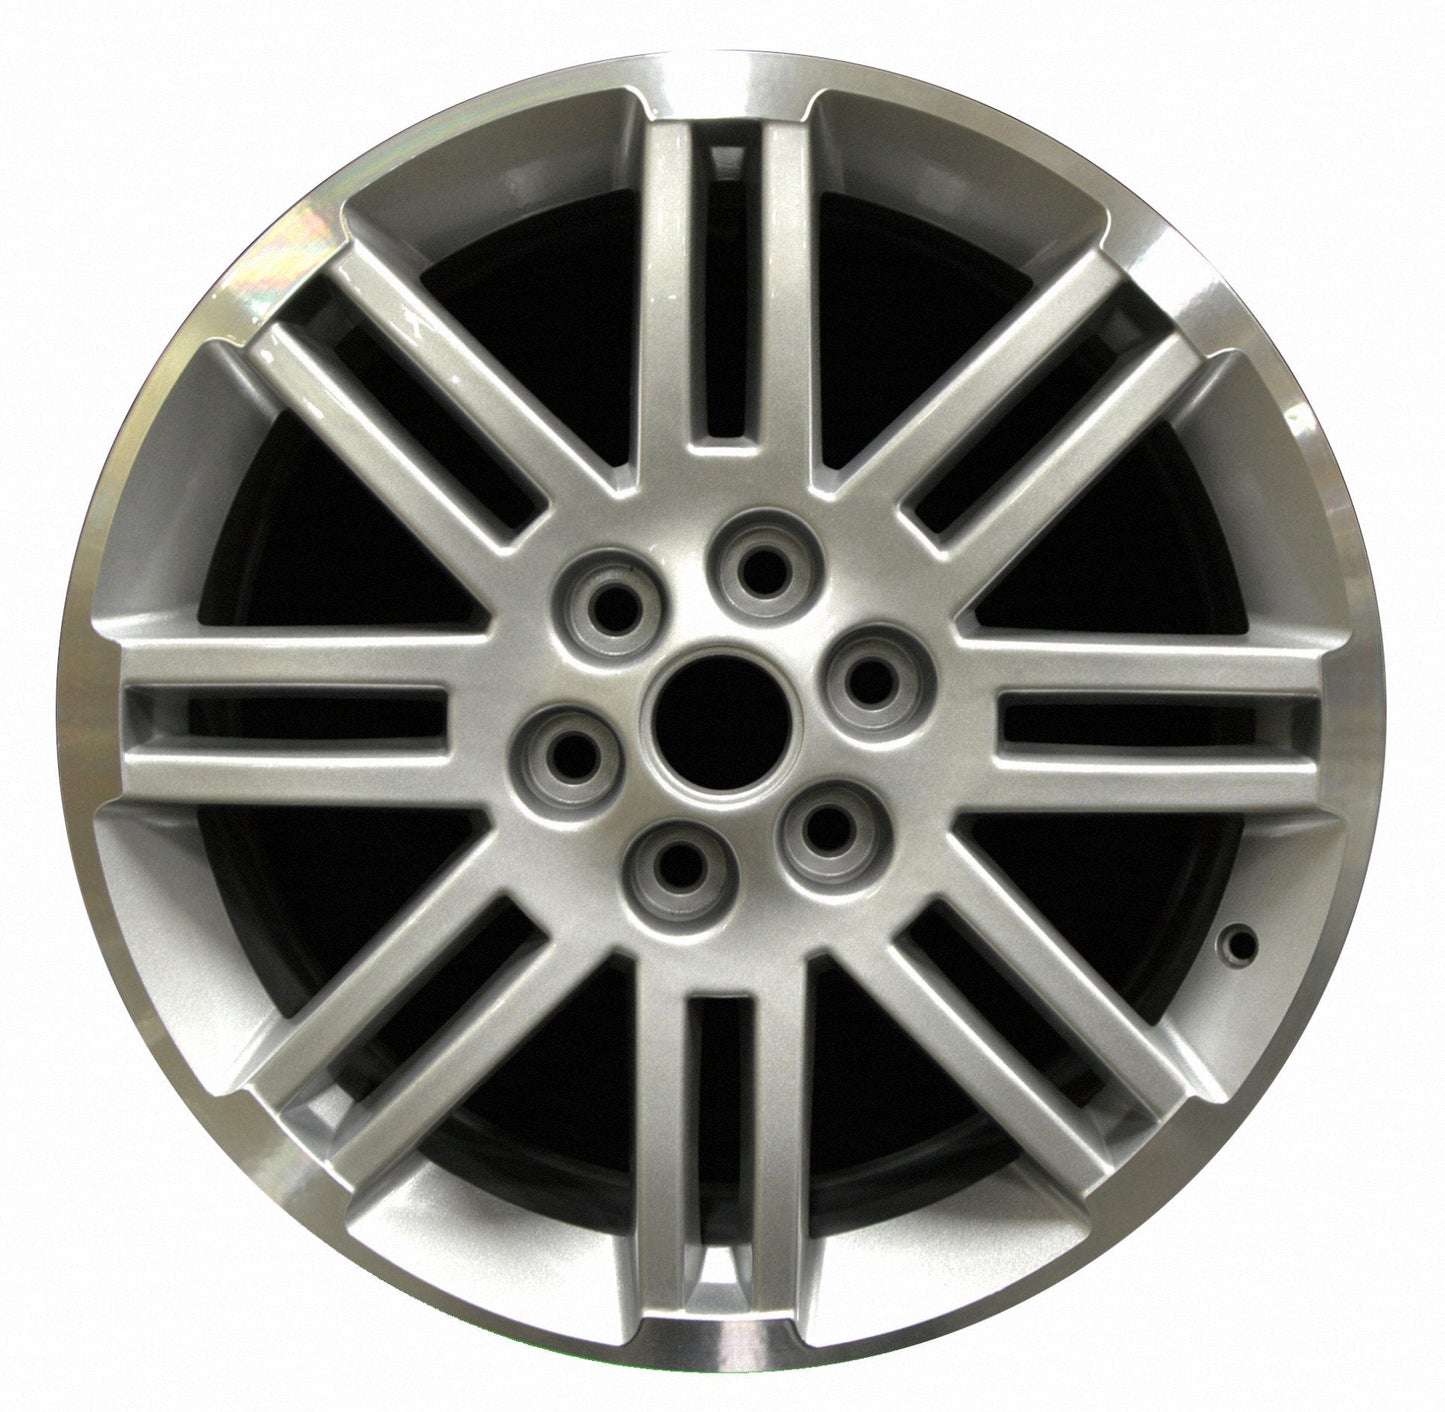 Saturn Outlook  2009, 2010 Factory OEM Car Wheel Size 20x7.5 Alloy WAO.7063.PS02.FC